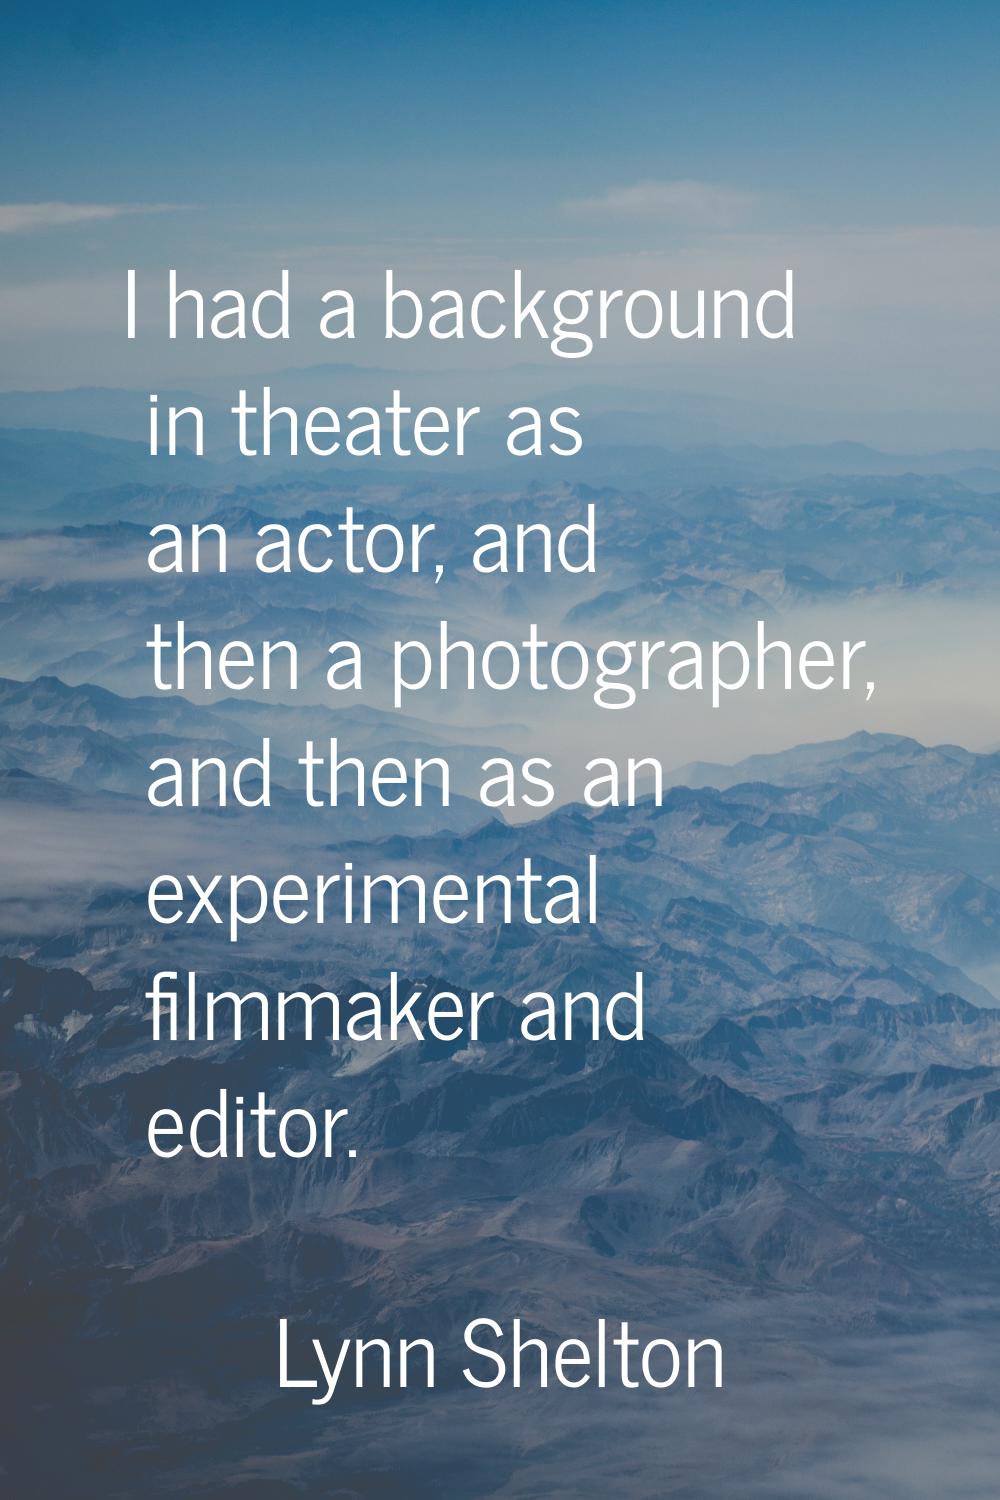 I had a background in theater as an actor, and then a photographer, and then as an experimental fil